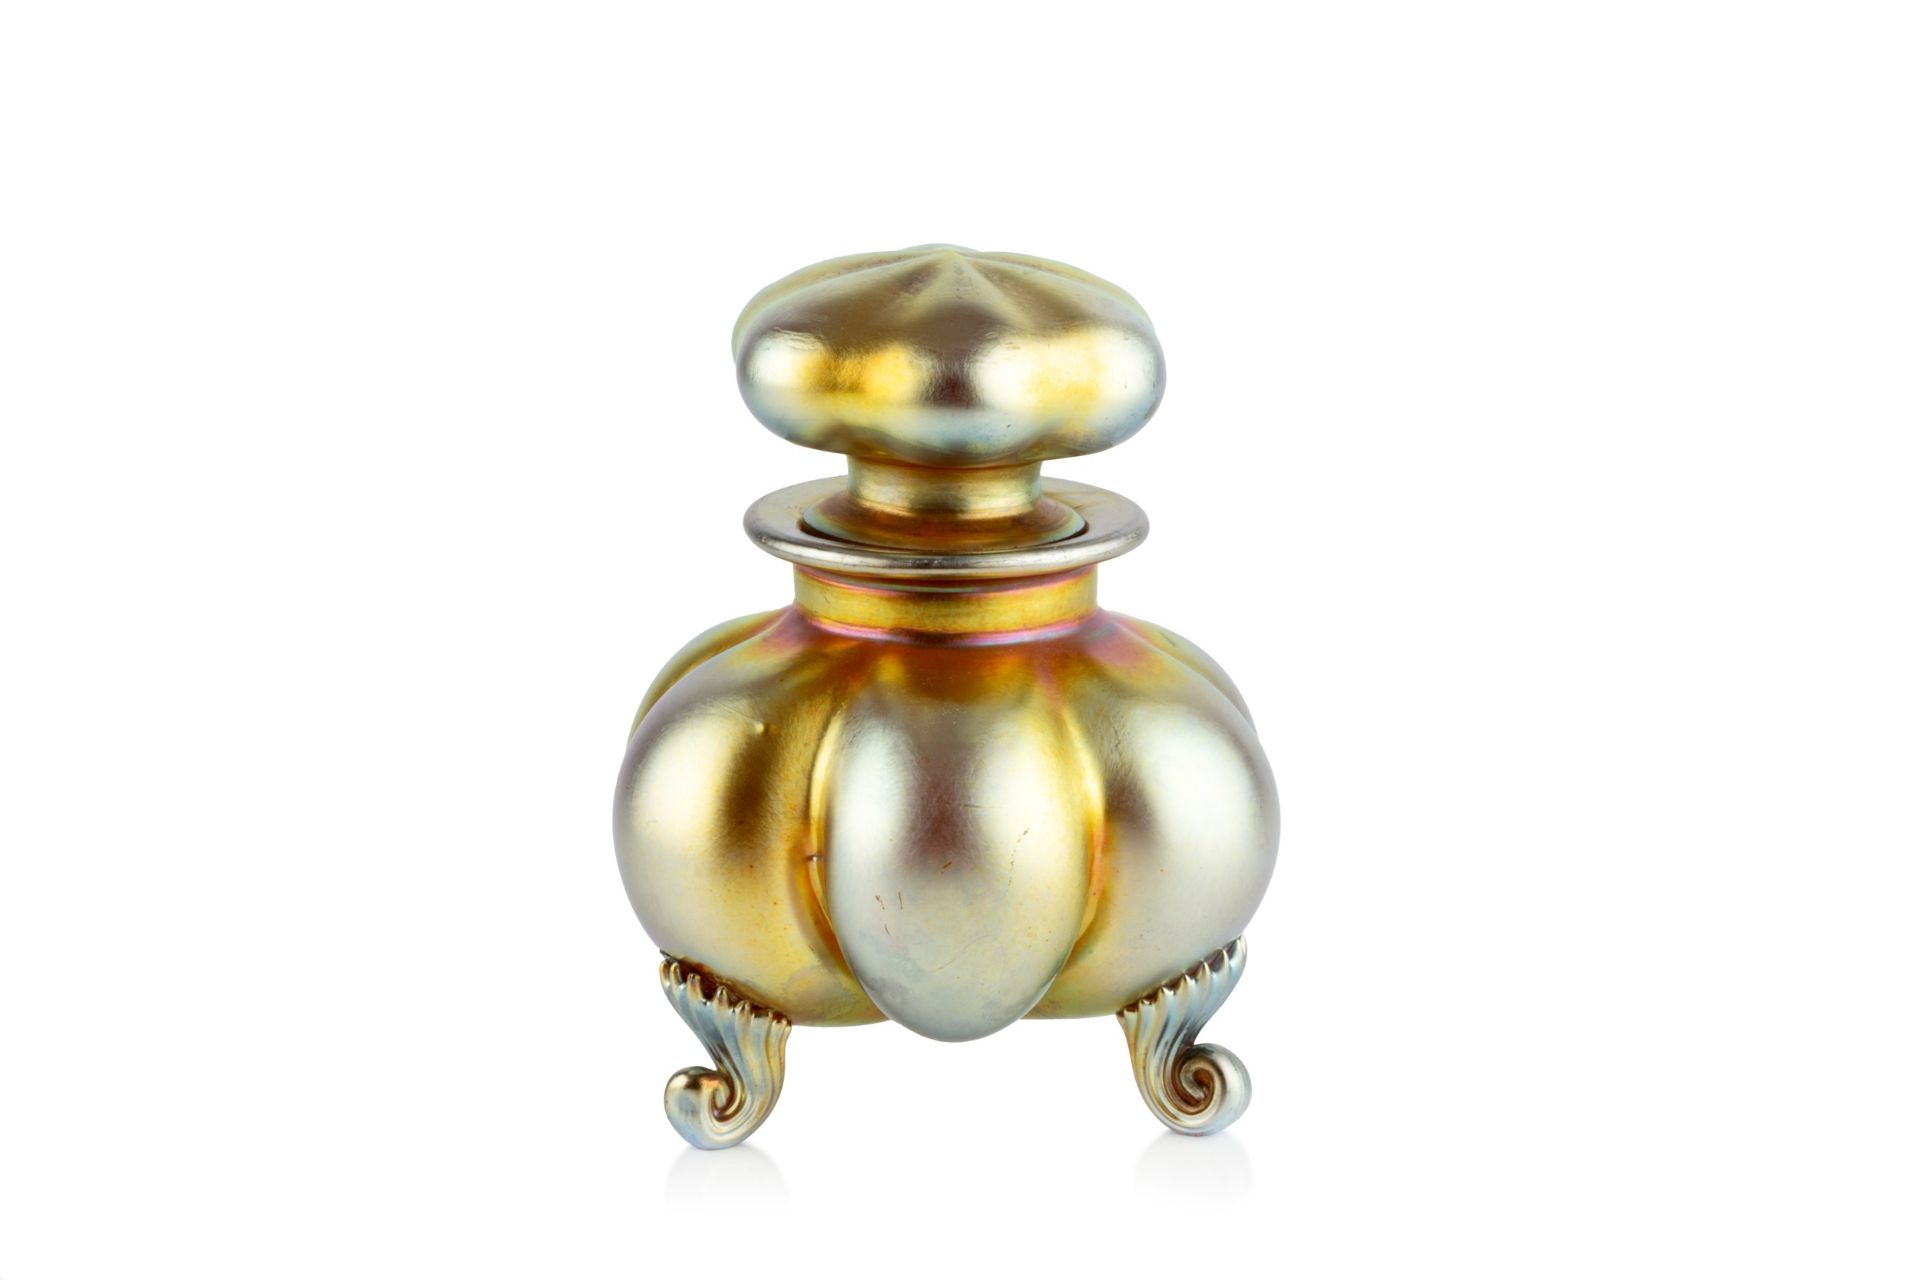 Attributed to Frederick Carder (1863-1963) for Steuben Glass Works Perfume bottle and stopper